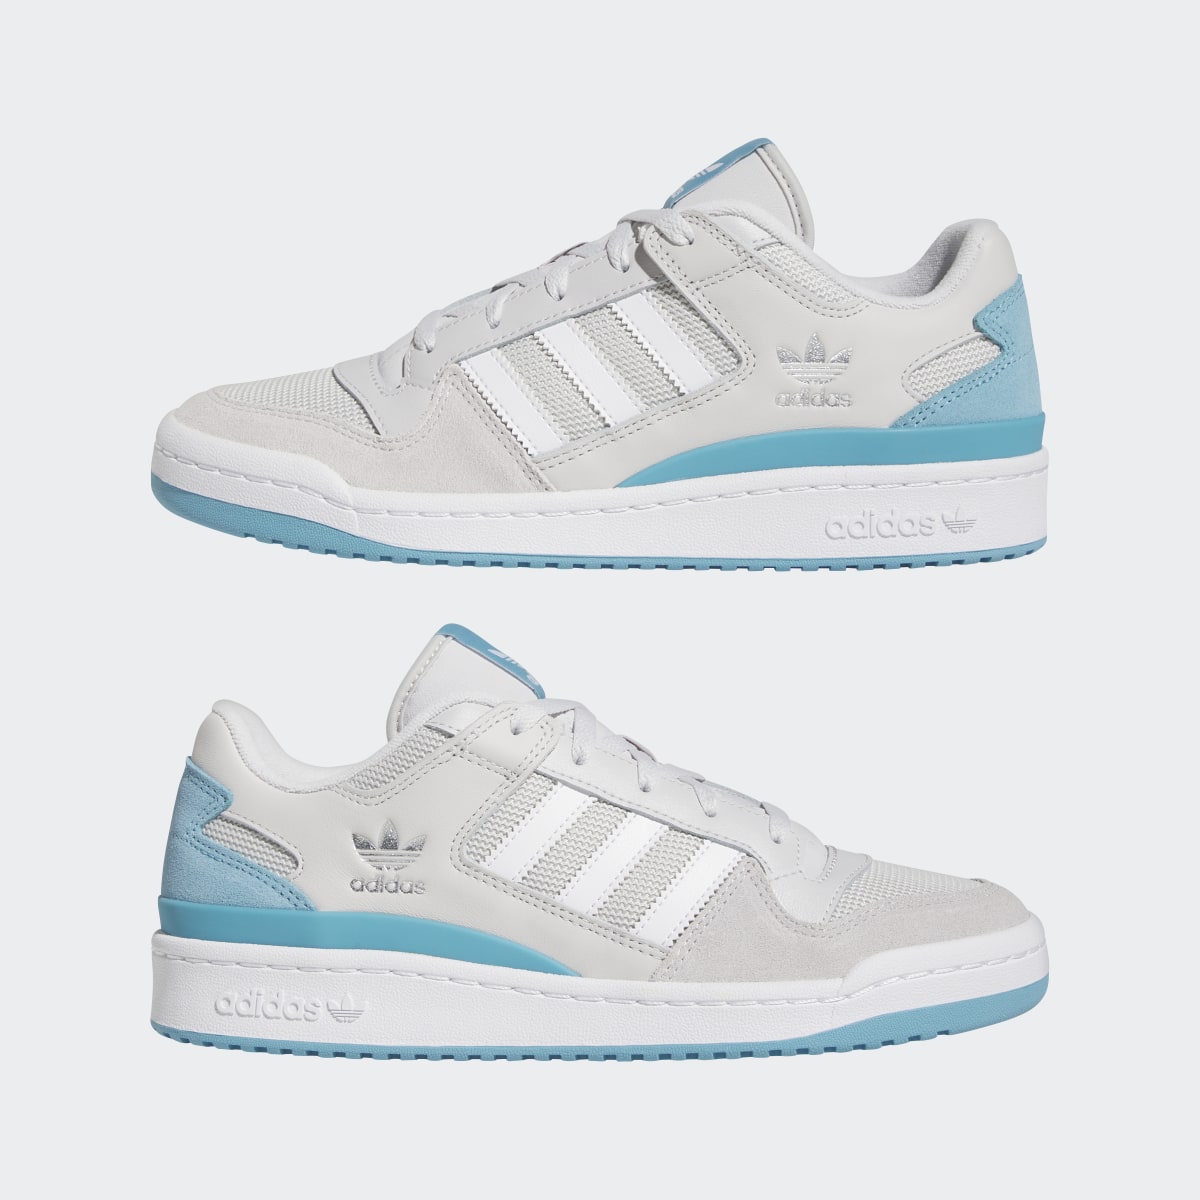 Adidas Forum Low Classic Shoes. 8